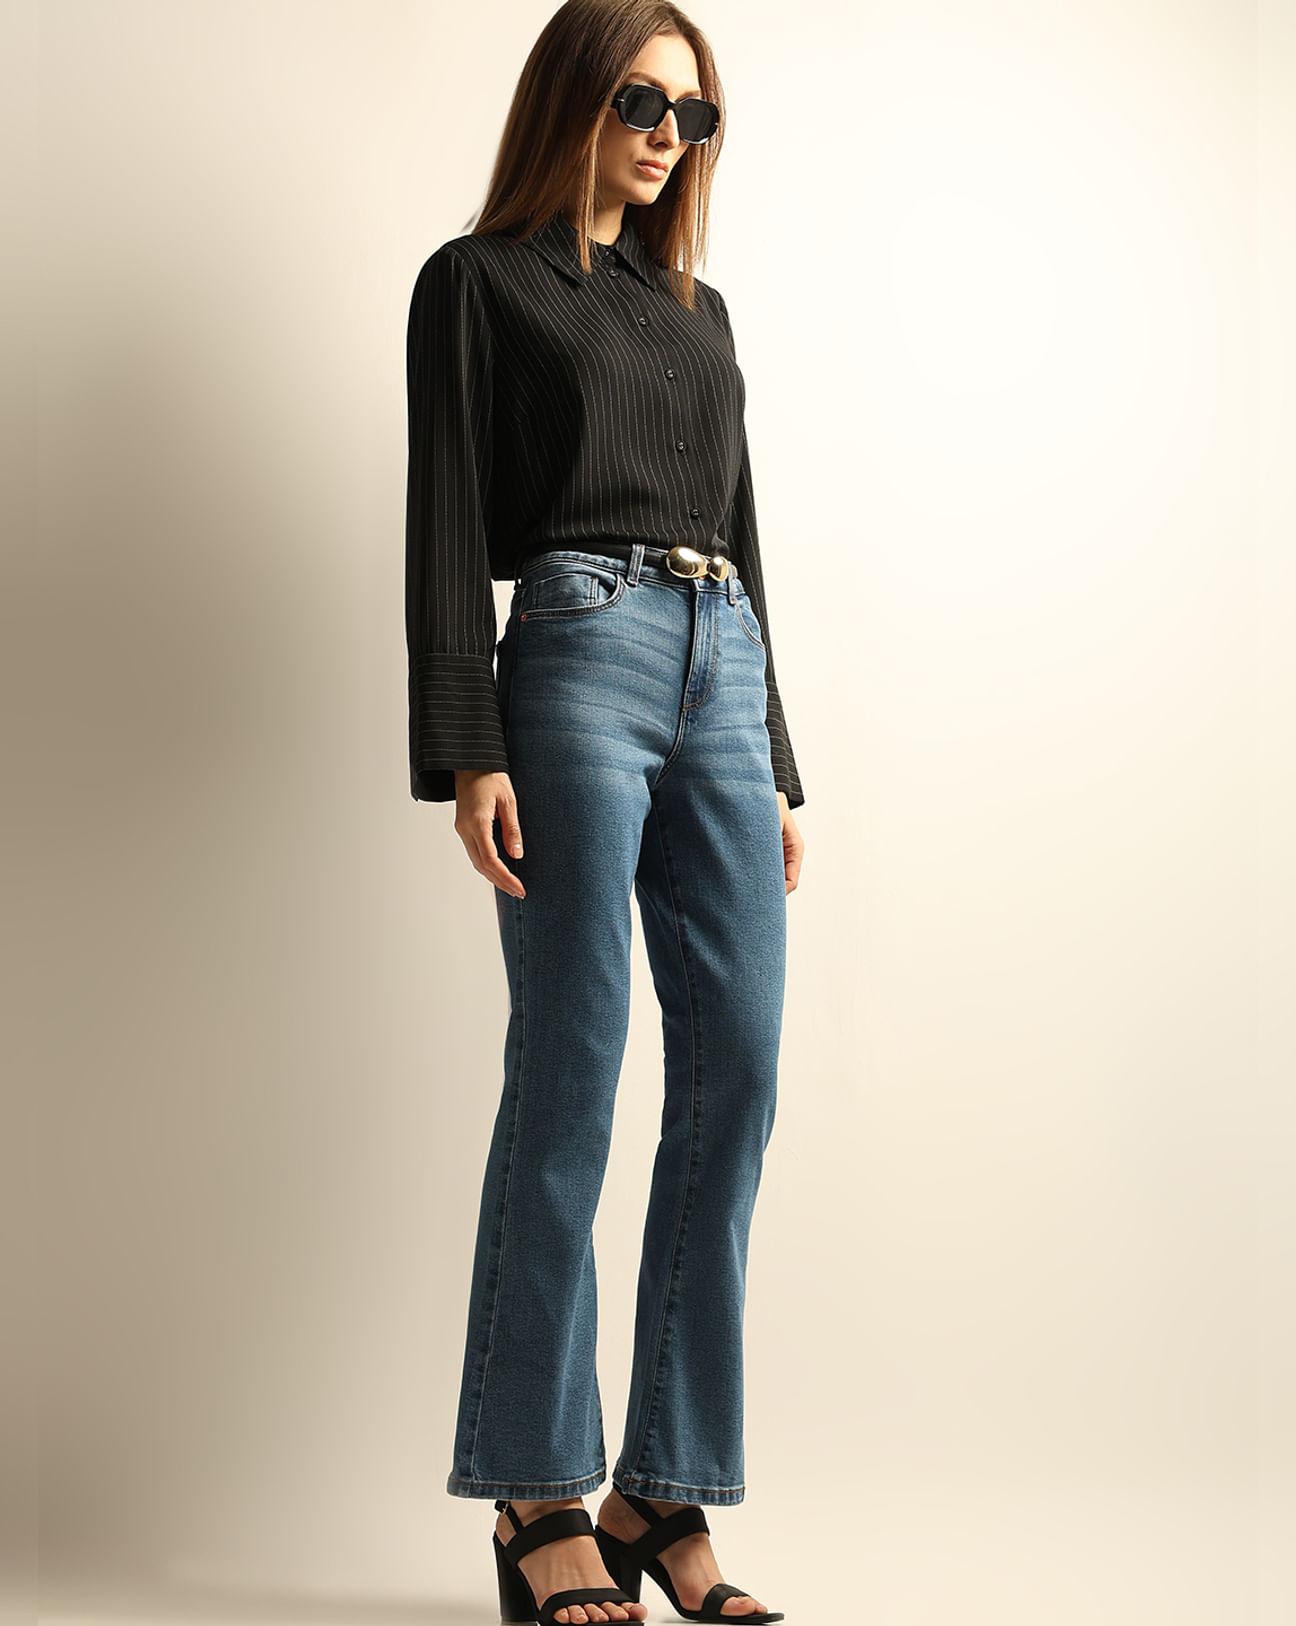 Blue Mid Rise Bootcut Jeans